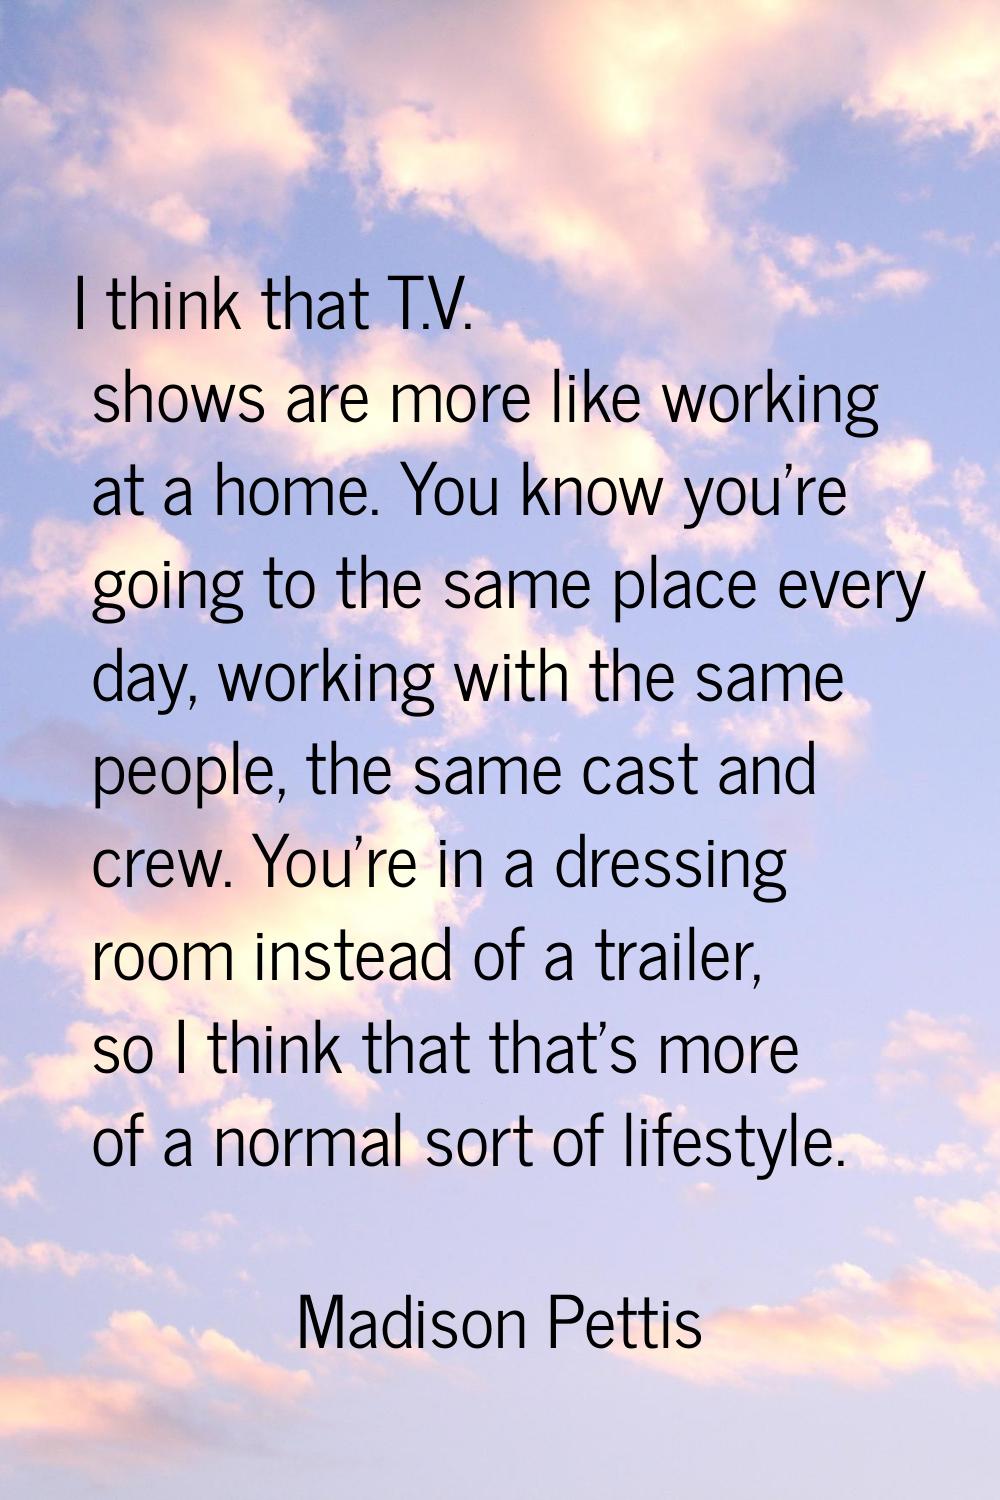 I think that T.V. shows are more like working at a home. You know you're going to the same place ev